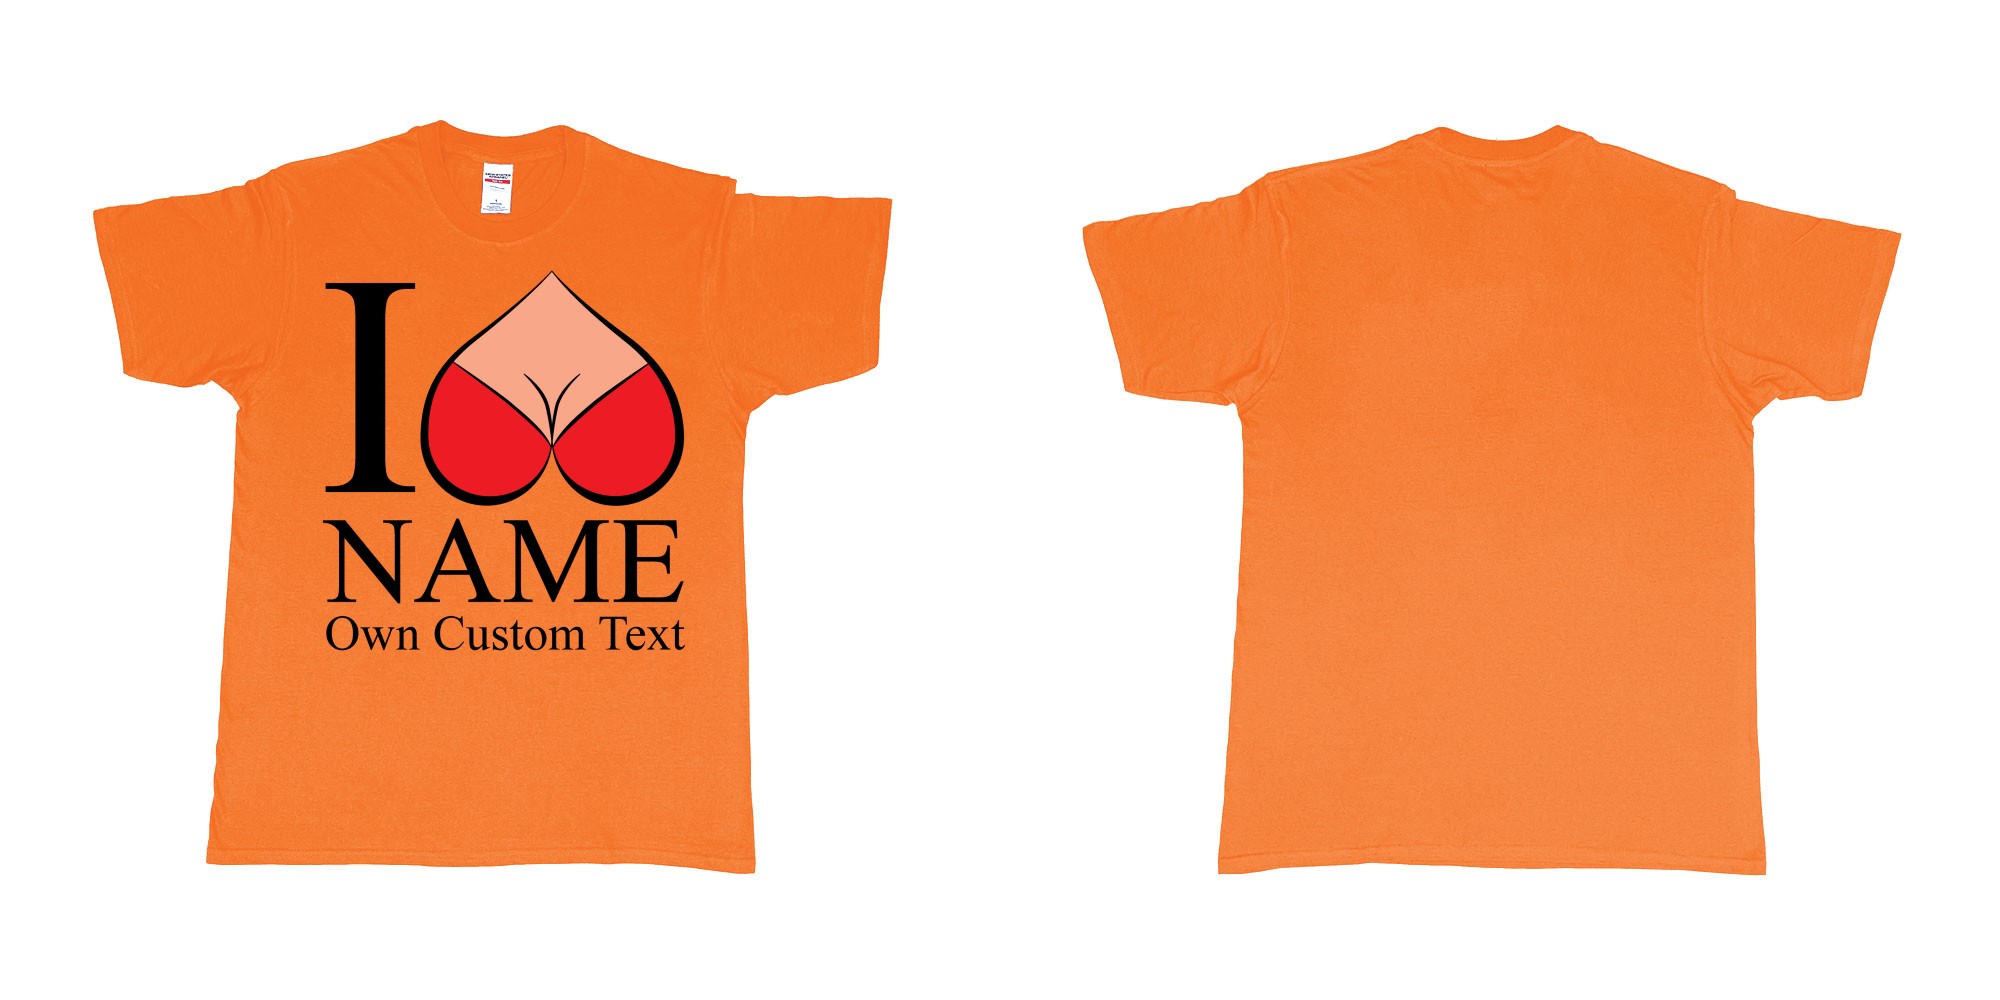 Custom tshirt design i reversed heart boobs custom text design print in fabric color orange choice your own text made in Bali by The Pirate Way